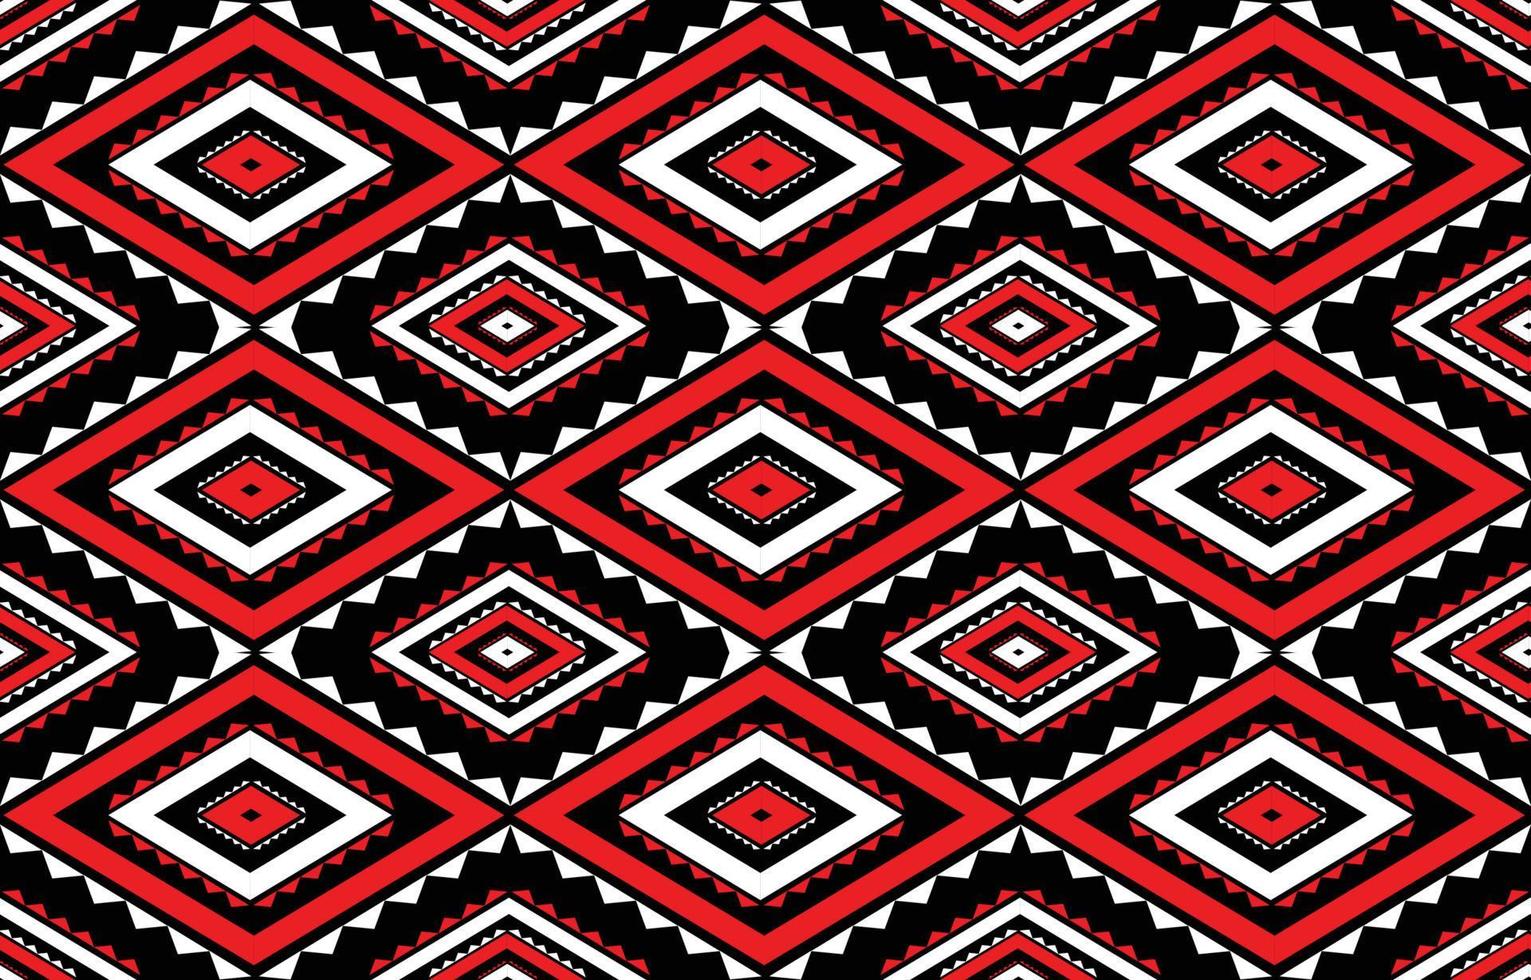 Native pattern traditional tribal textiles Abstract geometric ethnic pattern. Design for background or wallpaper, carpet, batik, clothing, cloth, vector illustration.